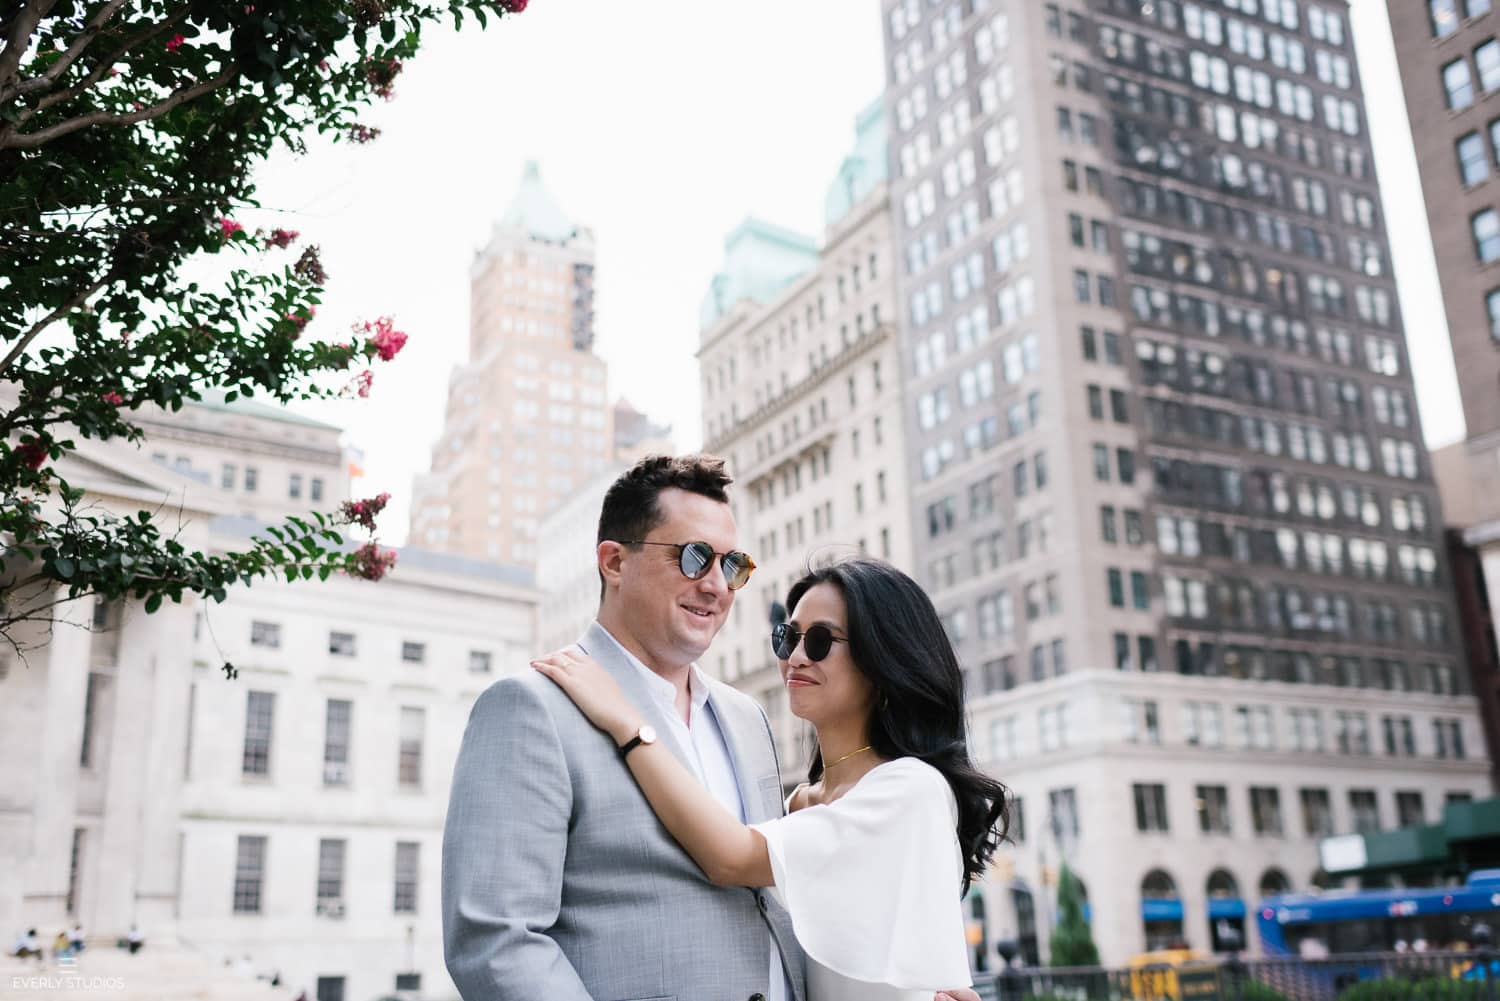 Getting married at Brooklyn City Hall: a Brooklyn City Hall wedding, photographer by Brooklyn wedding photographer Everly Studios